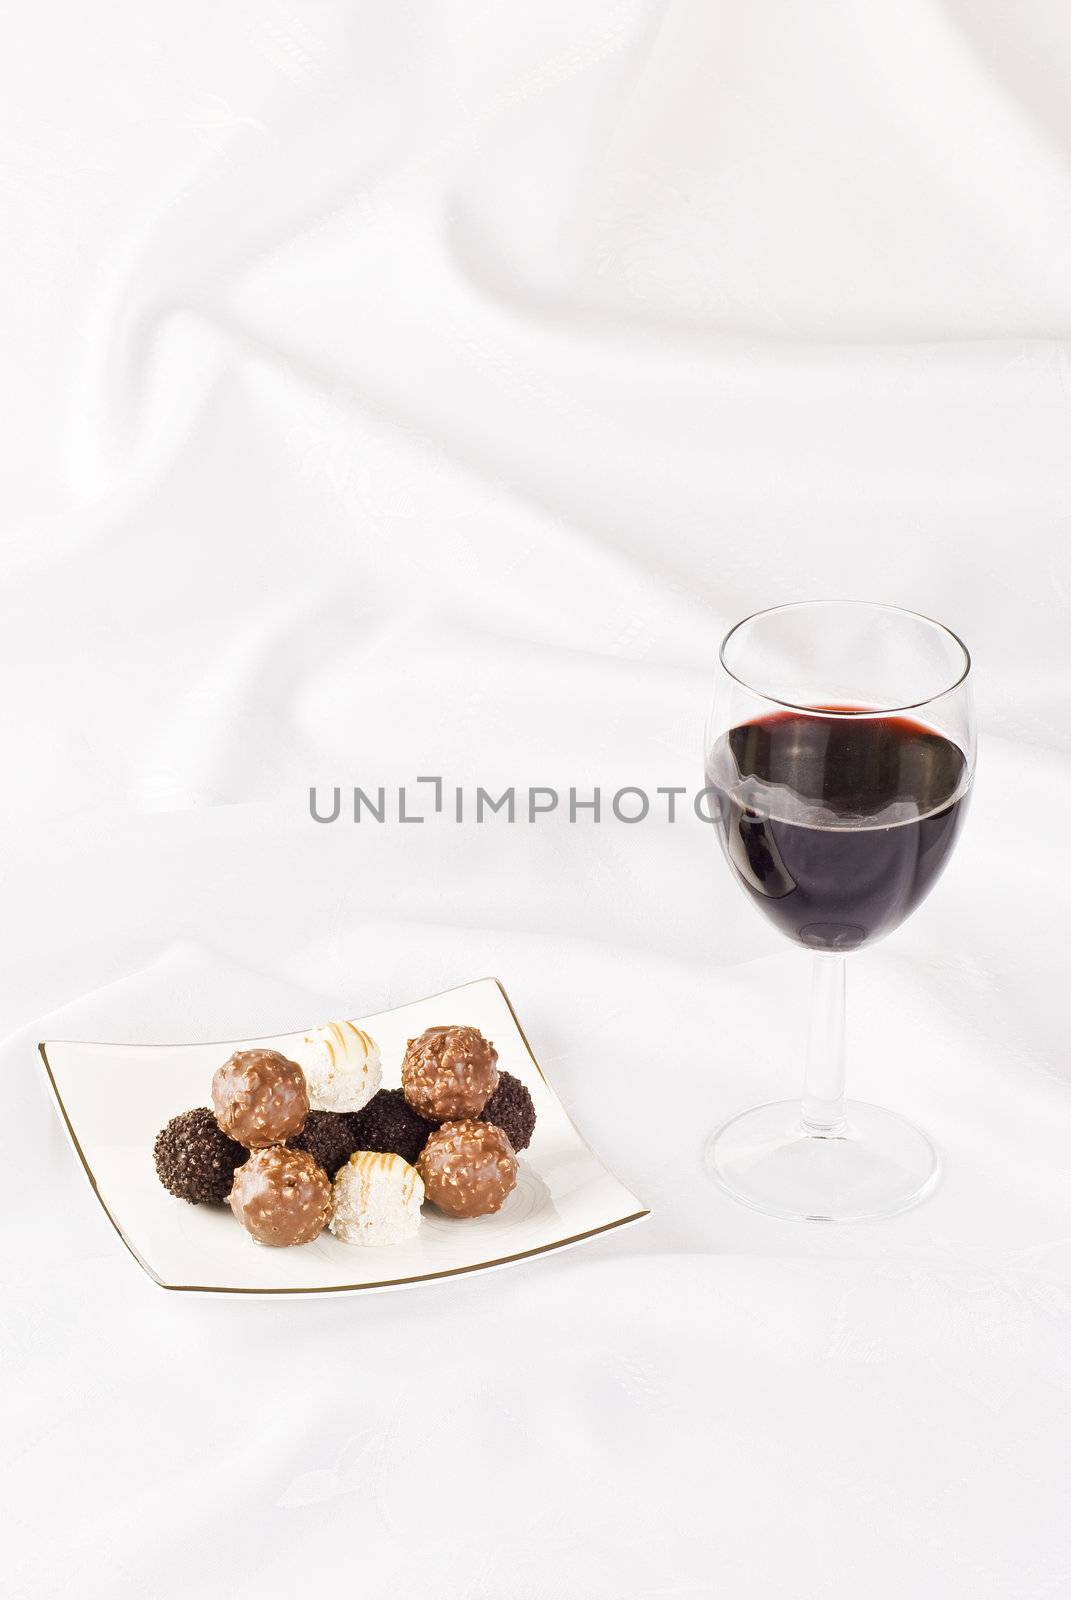 Red wine and plate of chocolate on the table cloth